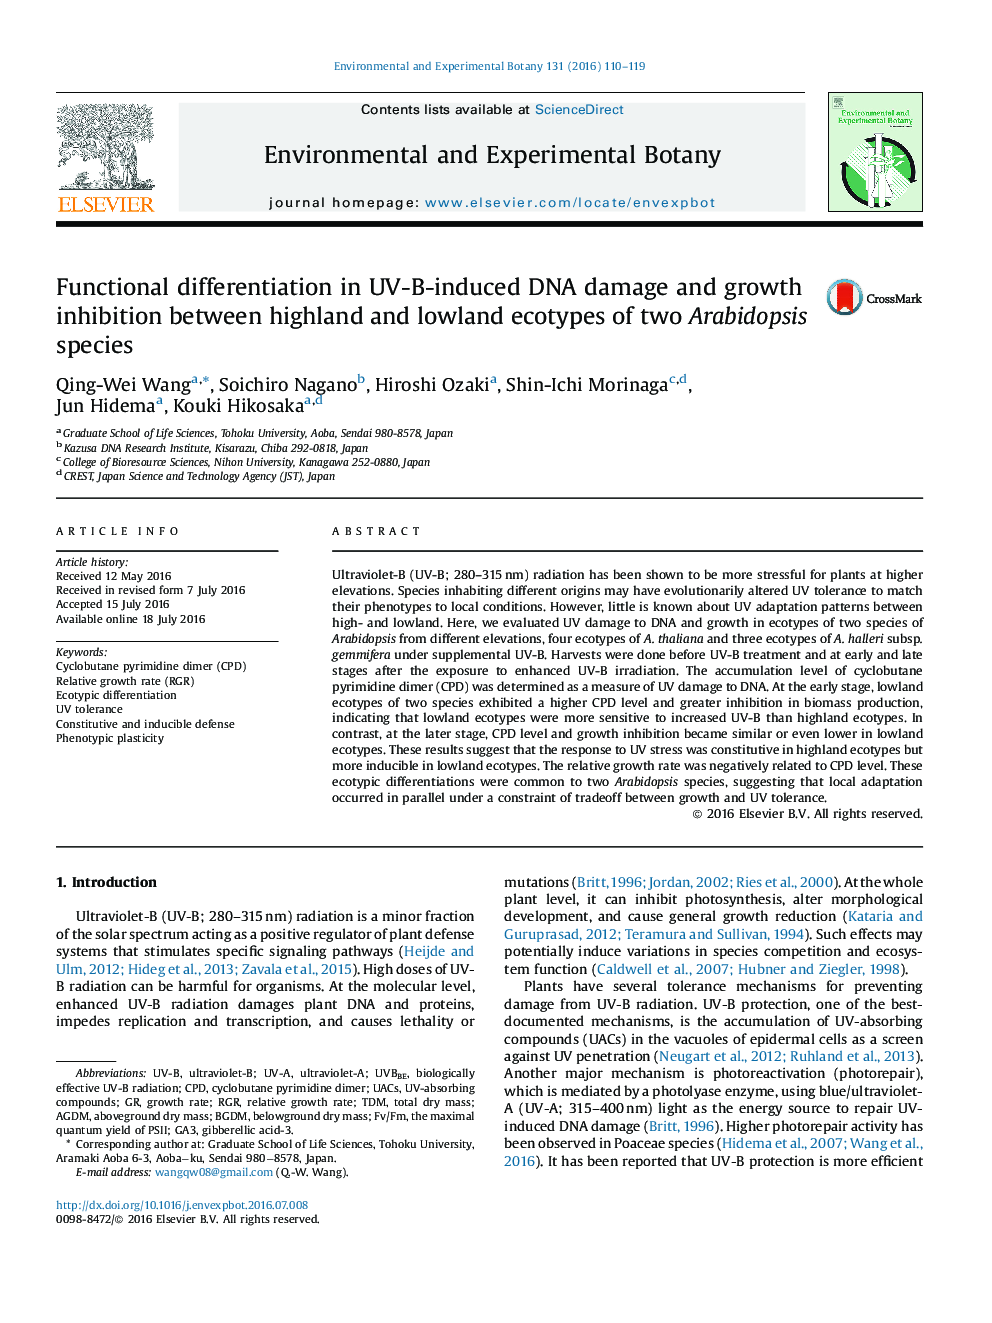 Functional differentiation in UV-B-induced DNA damage and growth inhibition between highland and lowland ecotypes of two Arabidopsis species